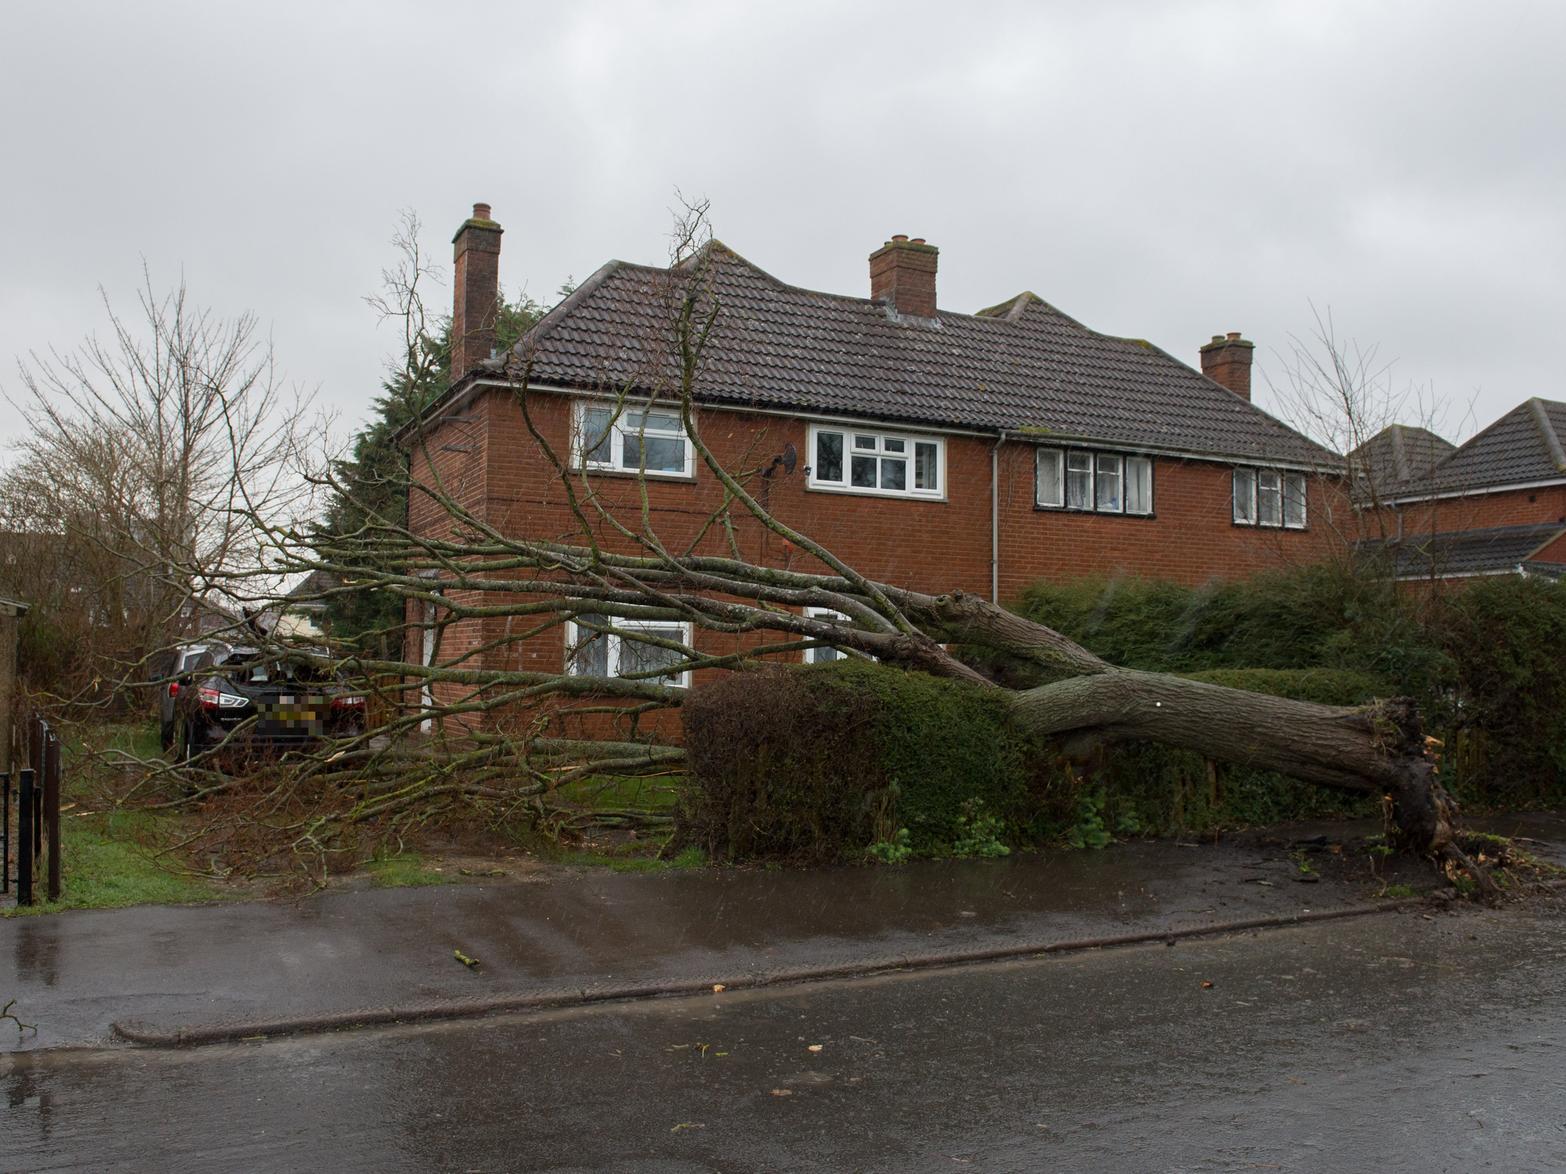 This house in Oak Green, Aylesbury had a lucky escape